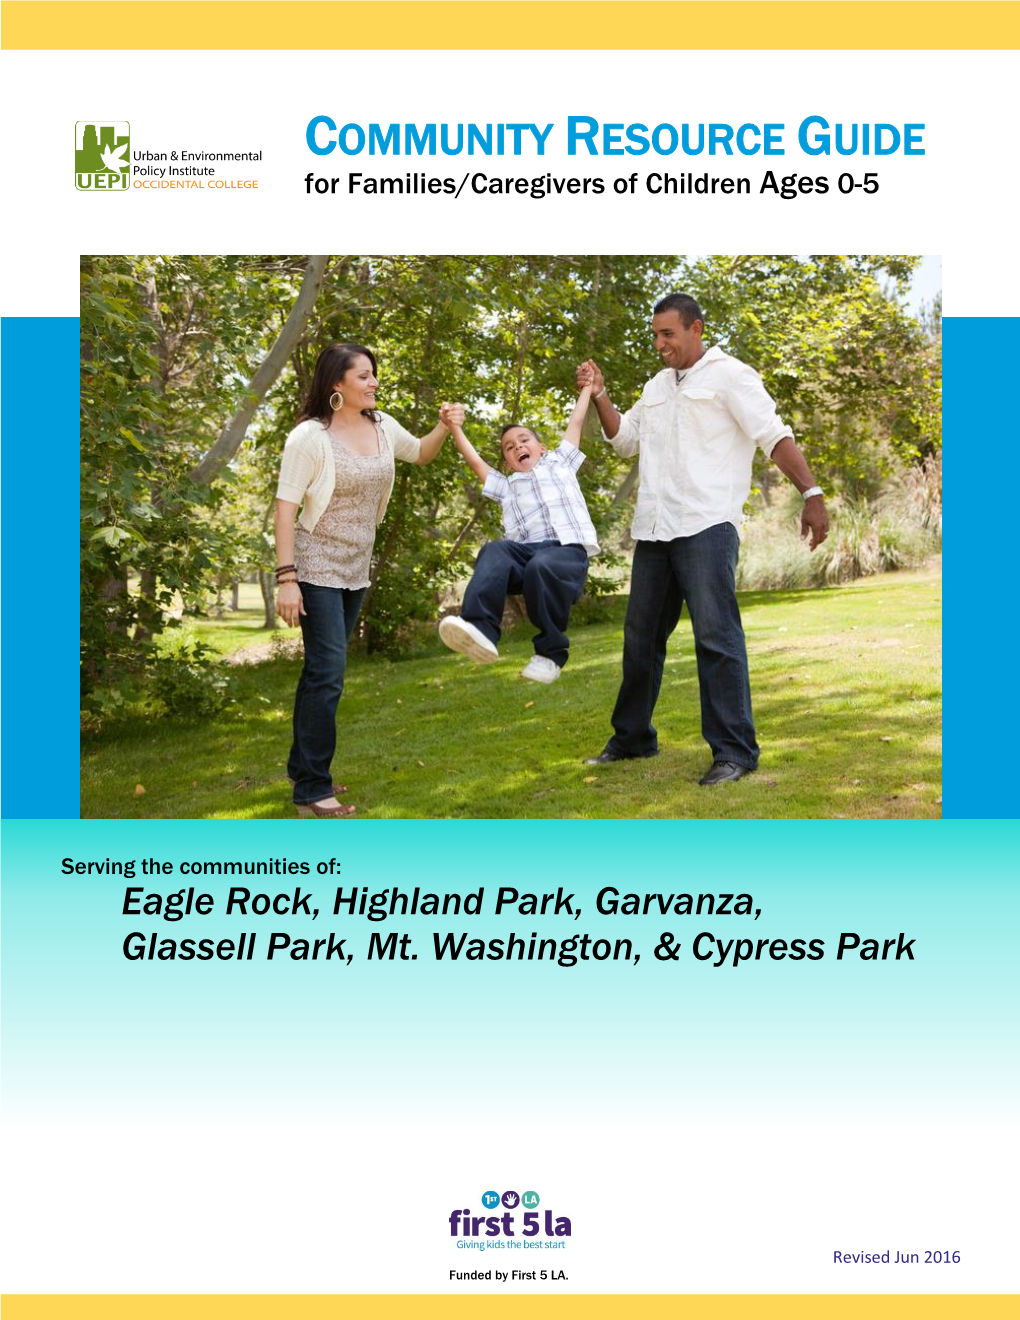 COMMUNITY RESOURCE GUIDE for Families/Caregivers of Children Ages 0-5